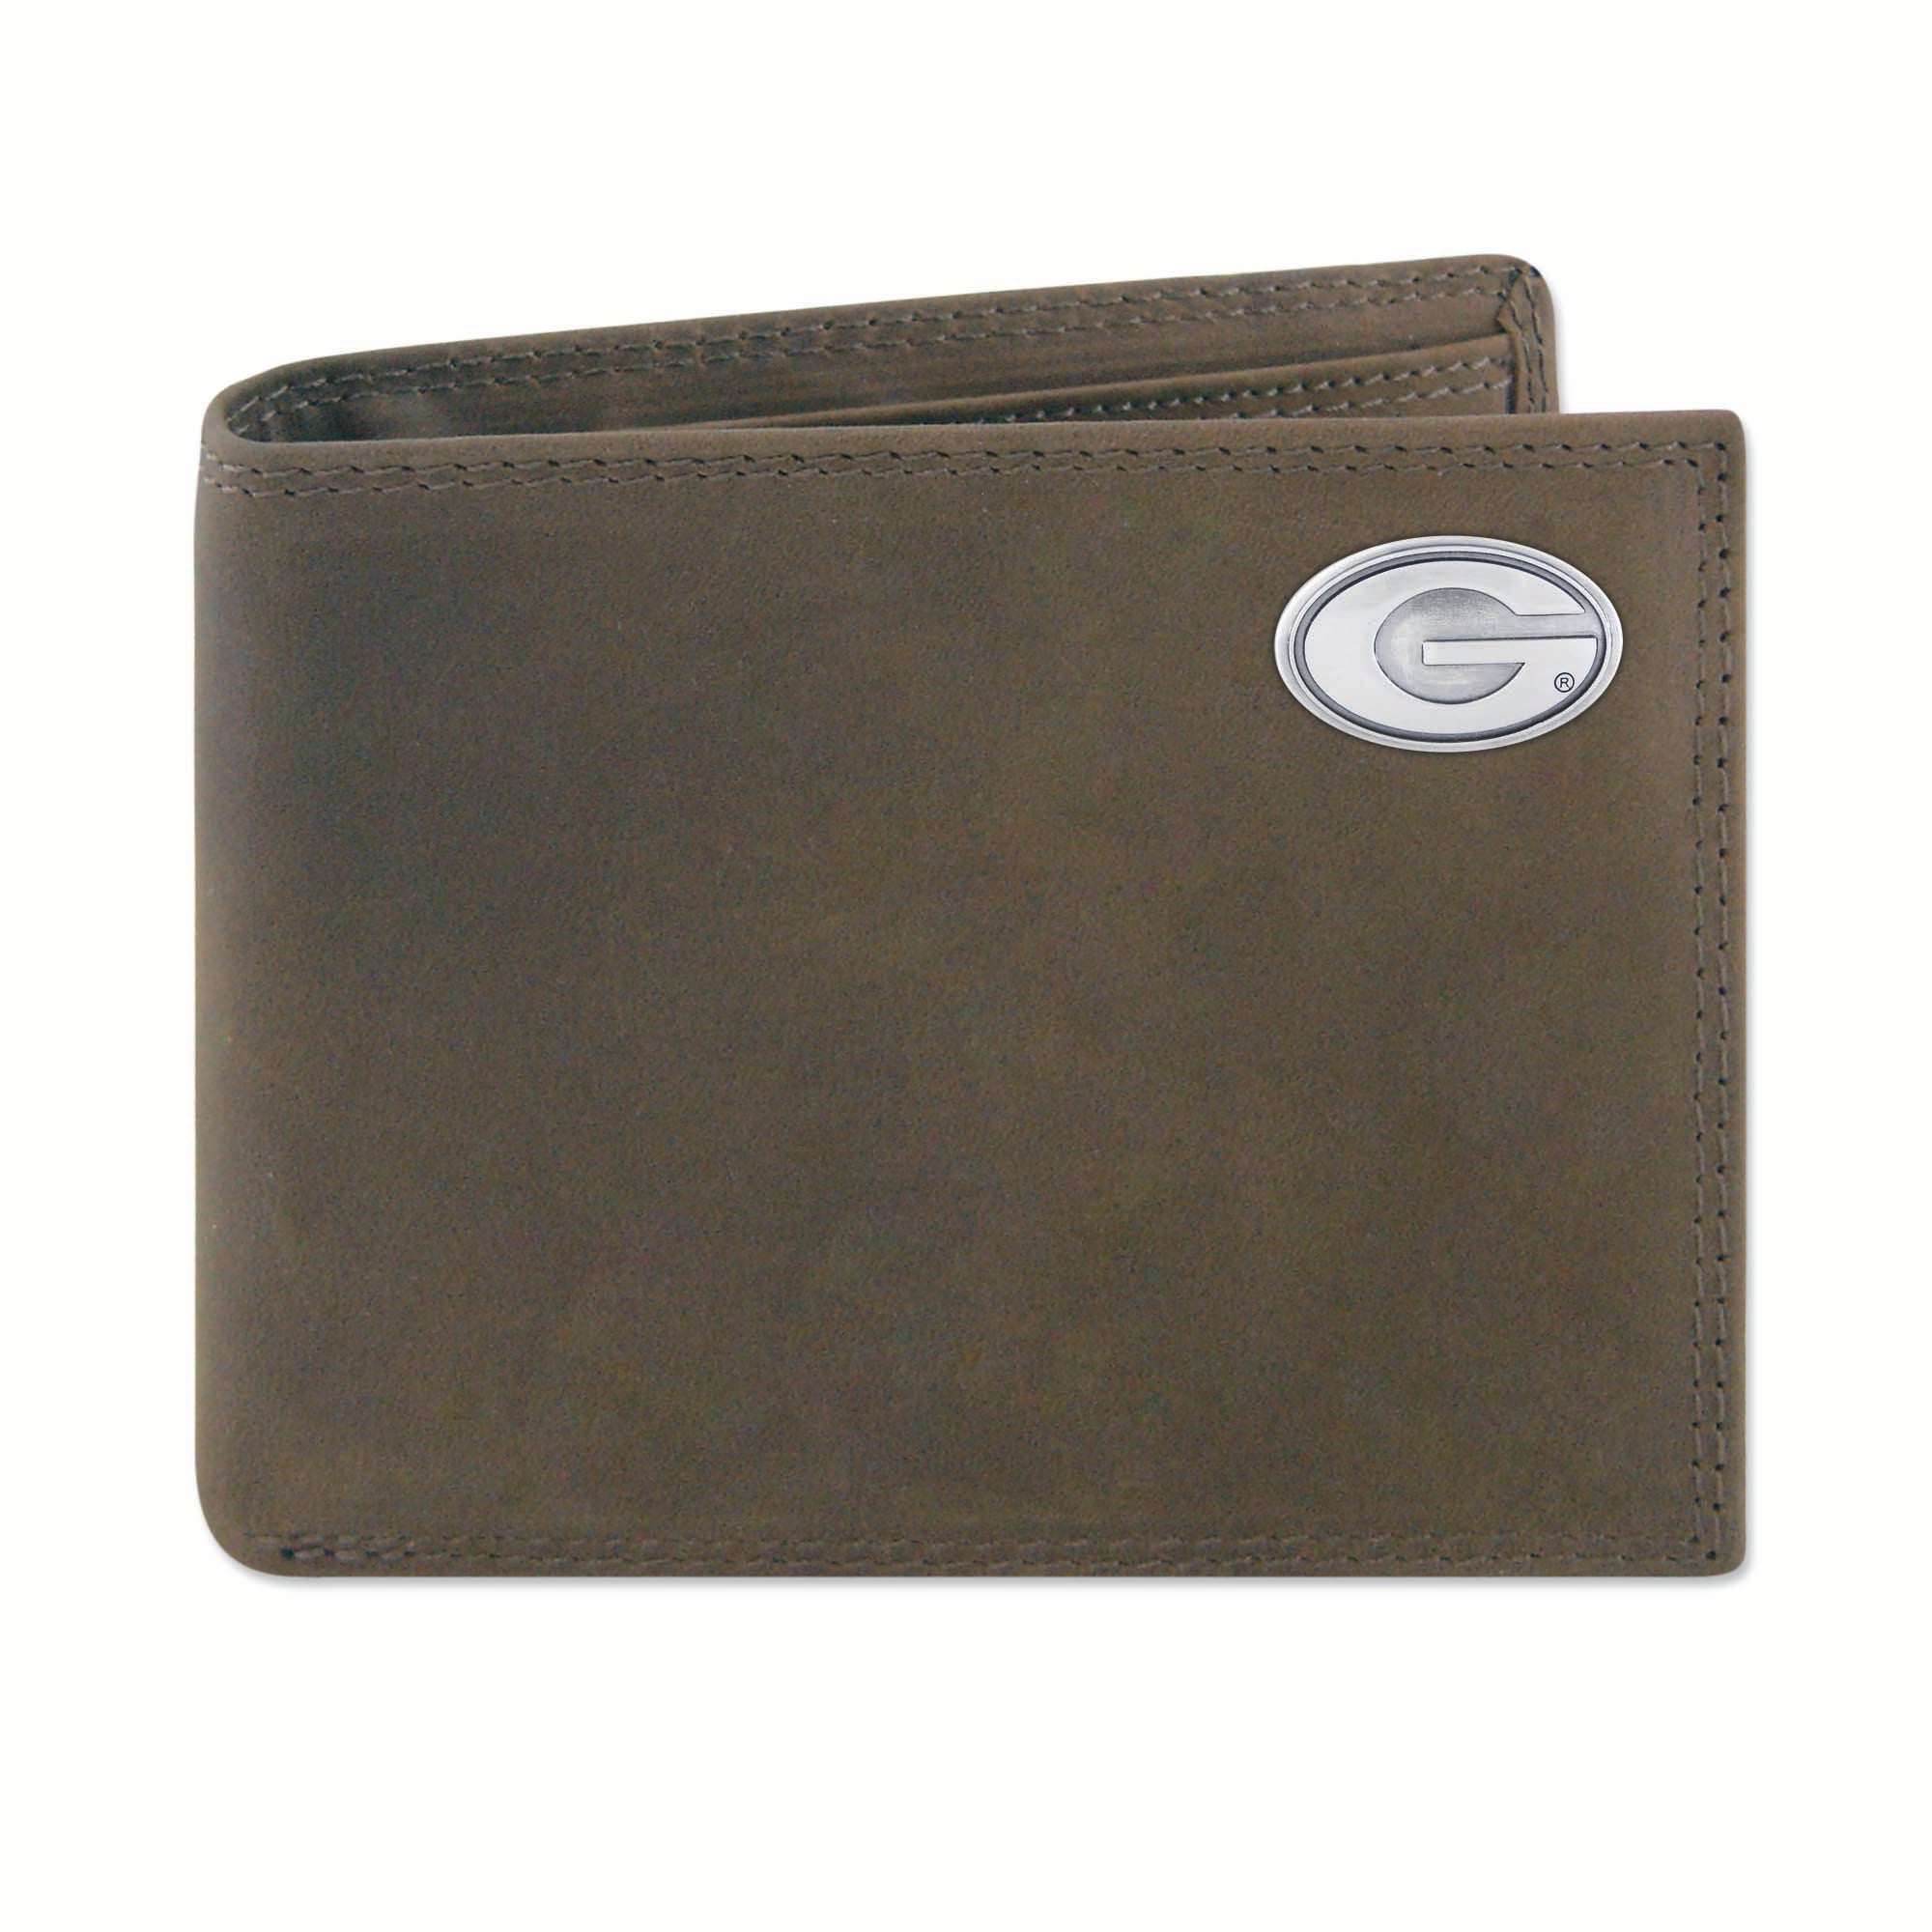 UGA Crazy Horse Conch Leather Bifold